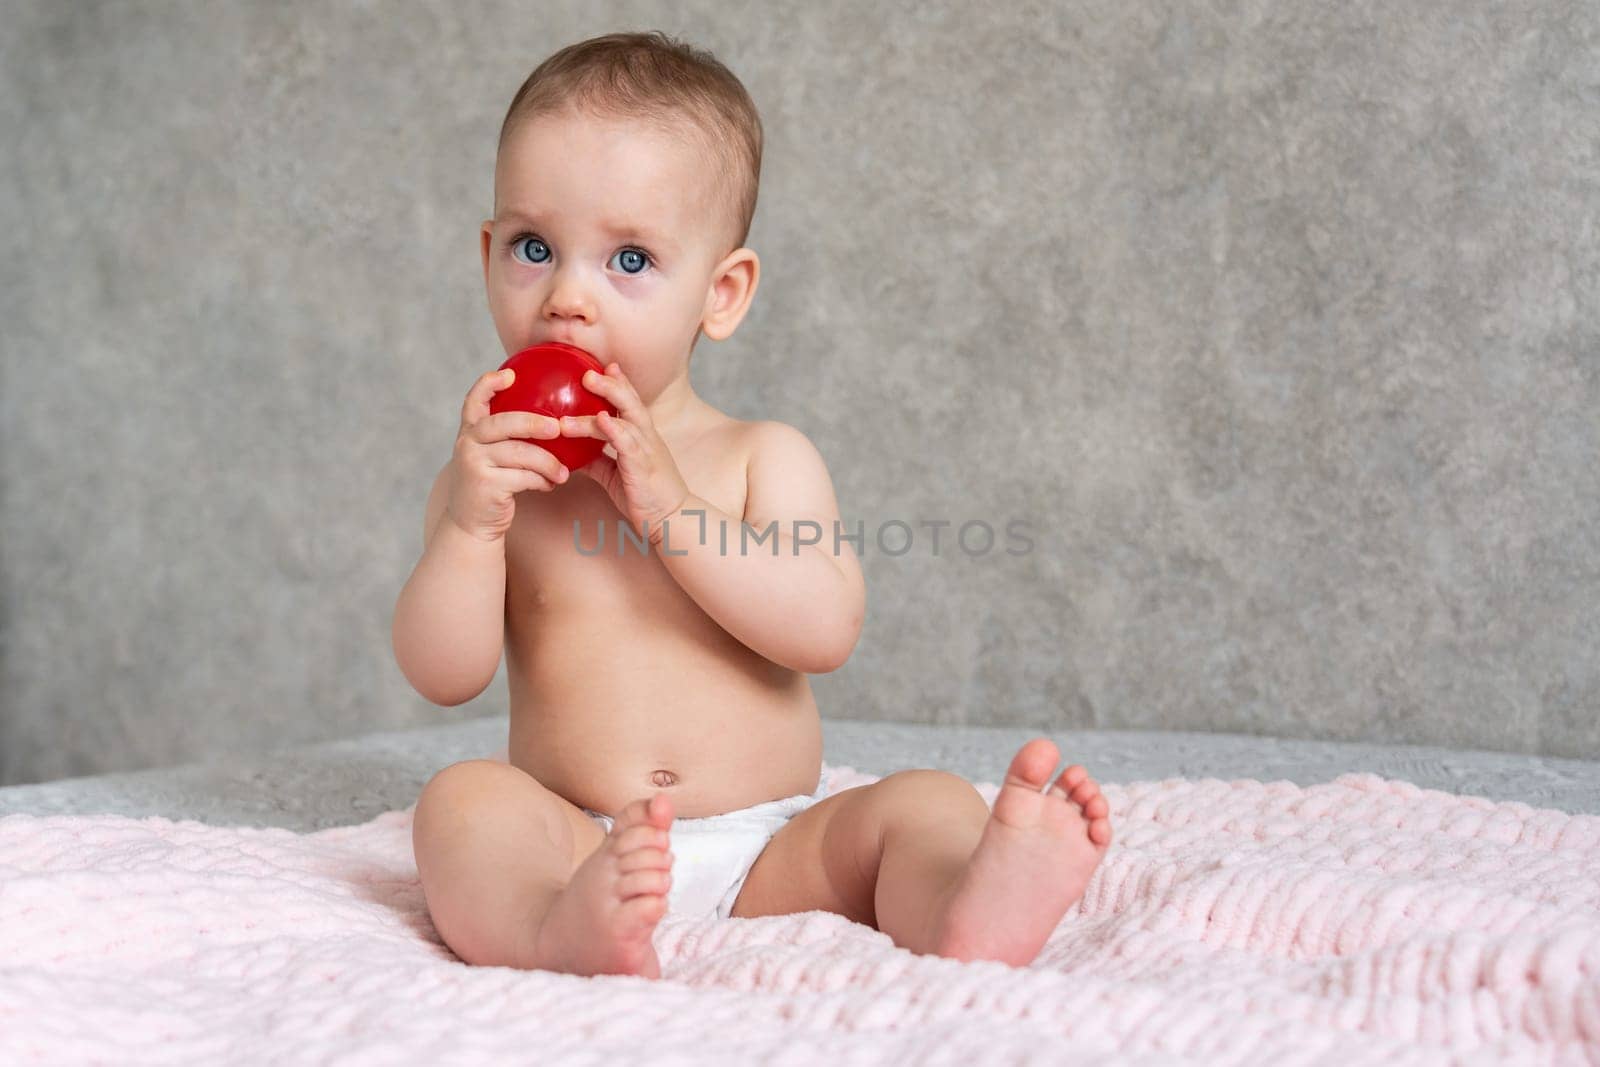 The baby is licking a small toy red ball with concentration.